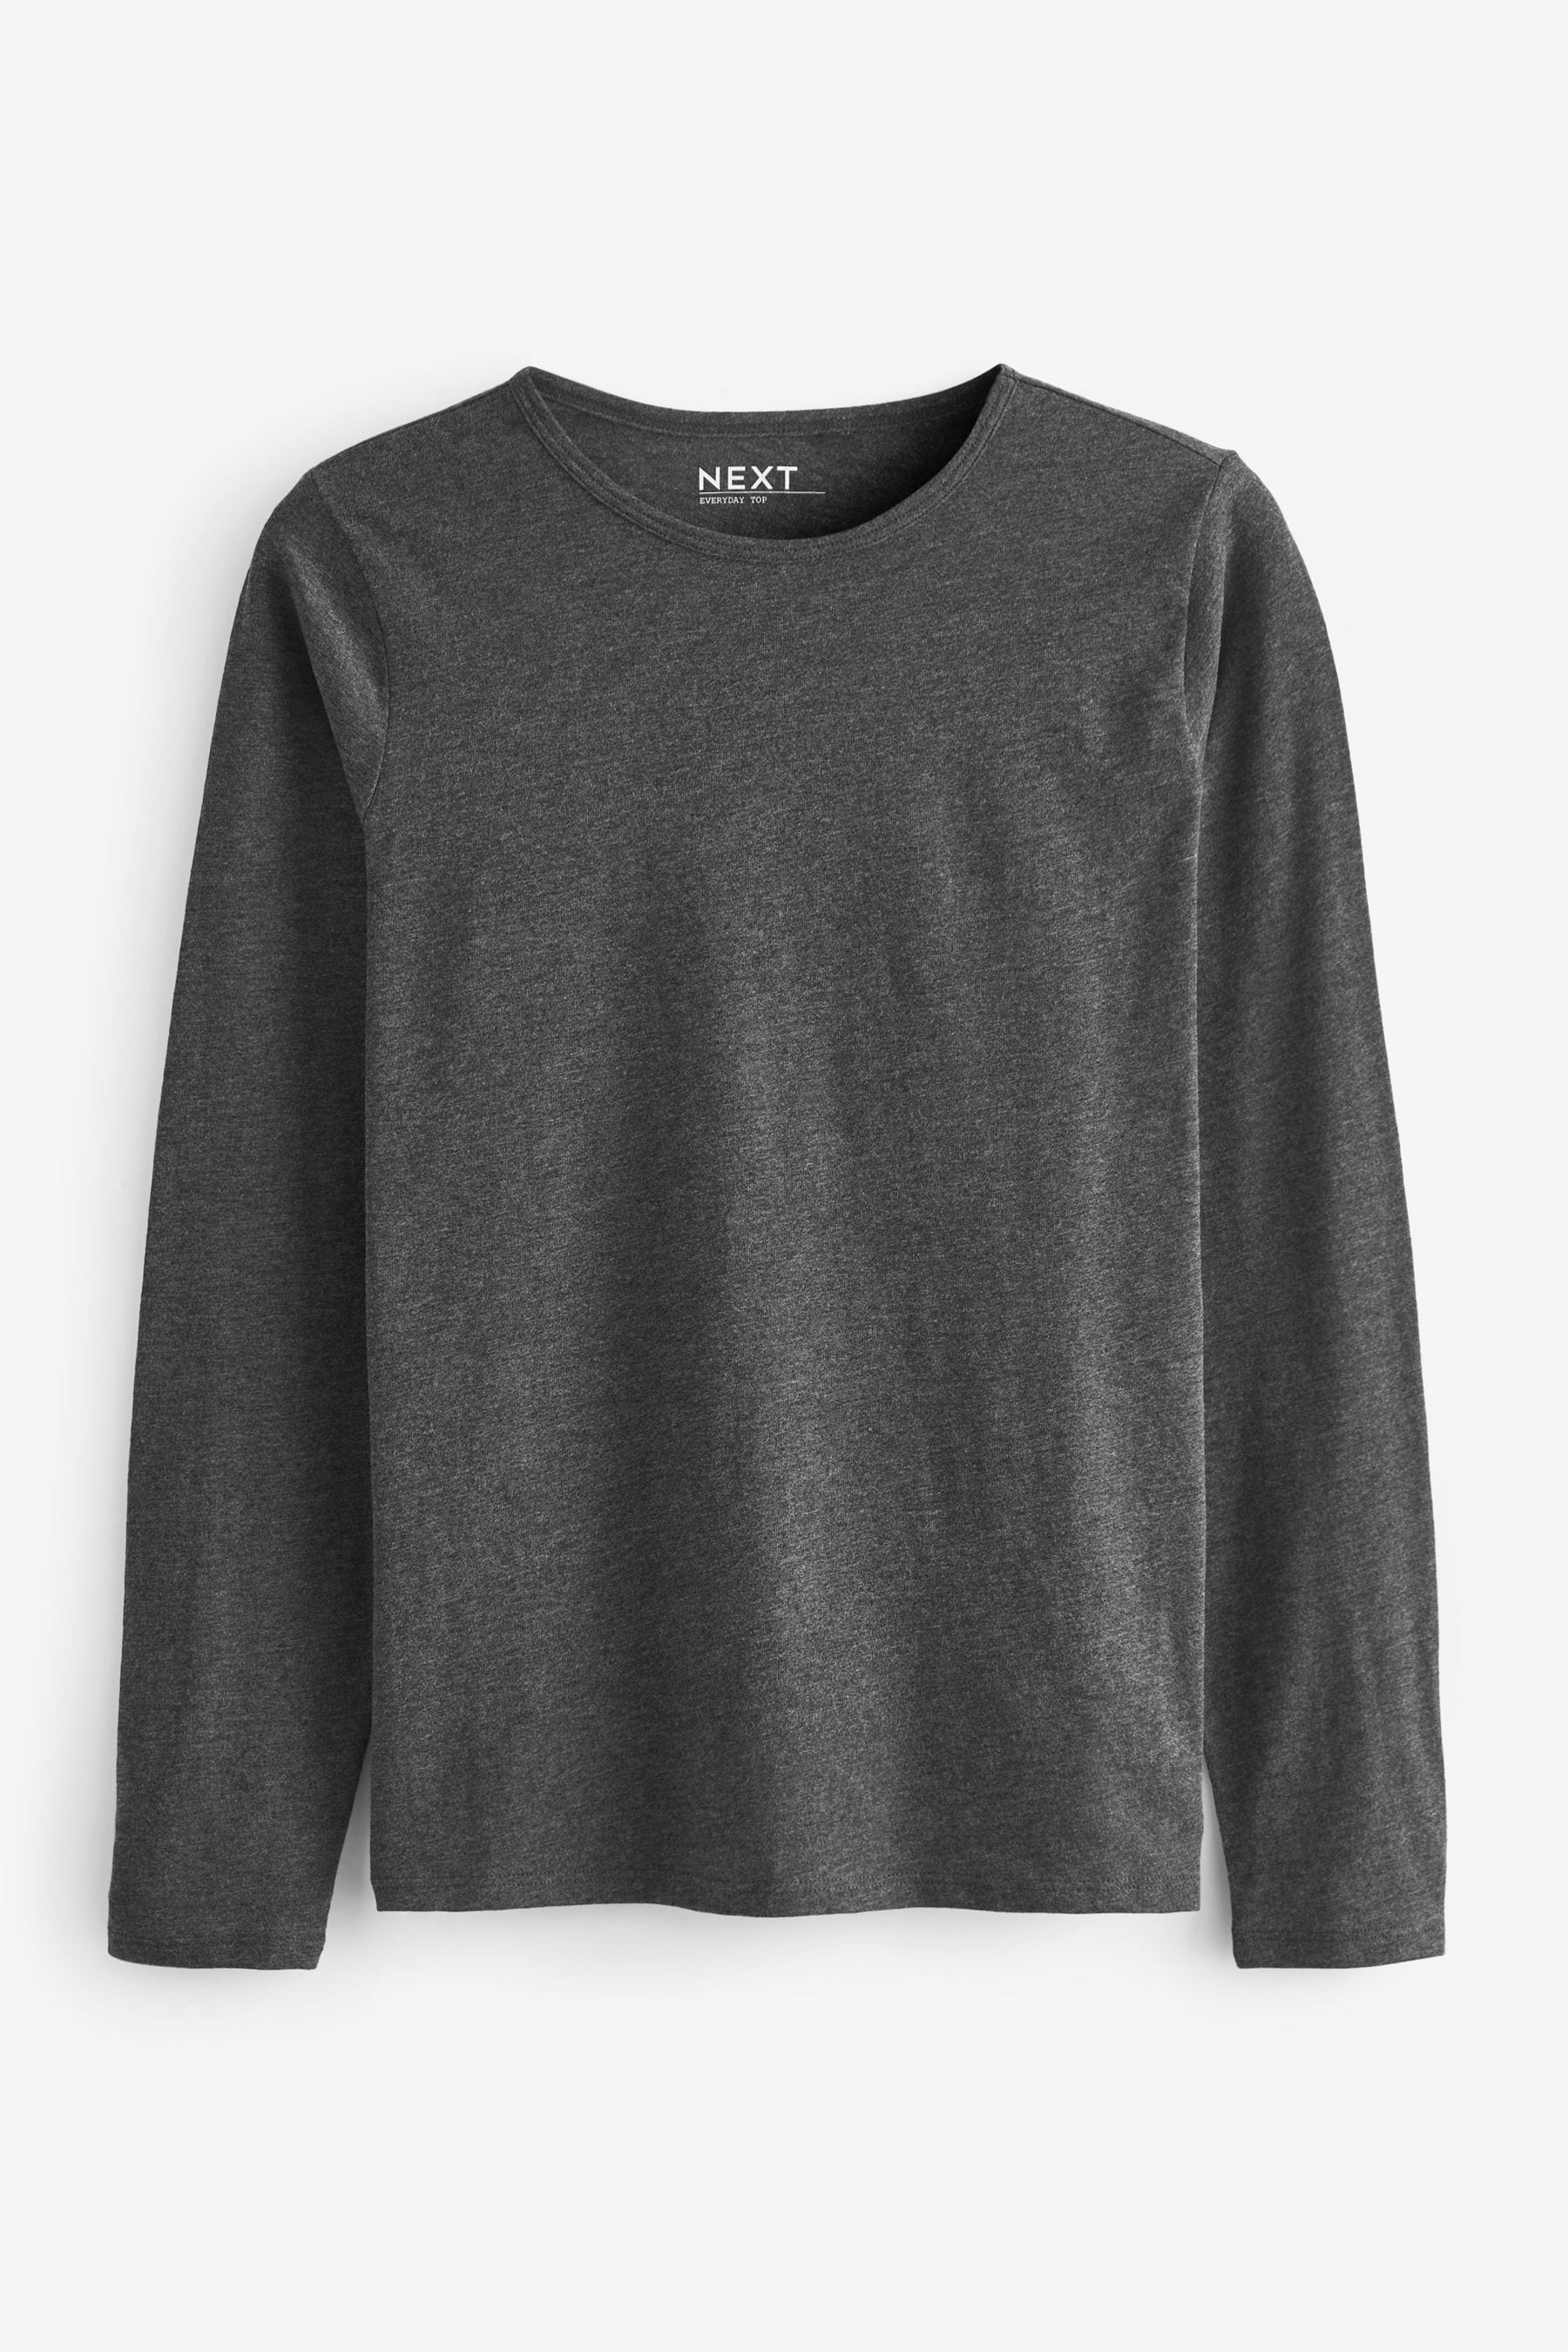 Buy The Everyday Crew Neck Long Sleeve Top from Next Israel